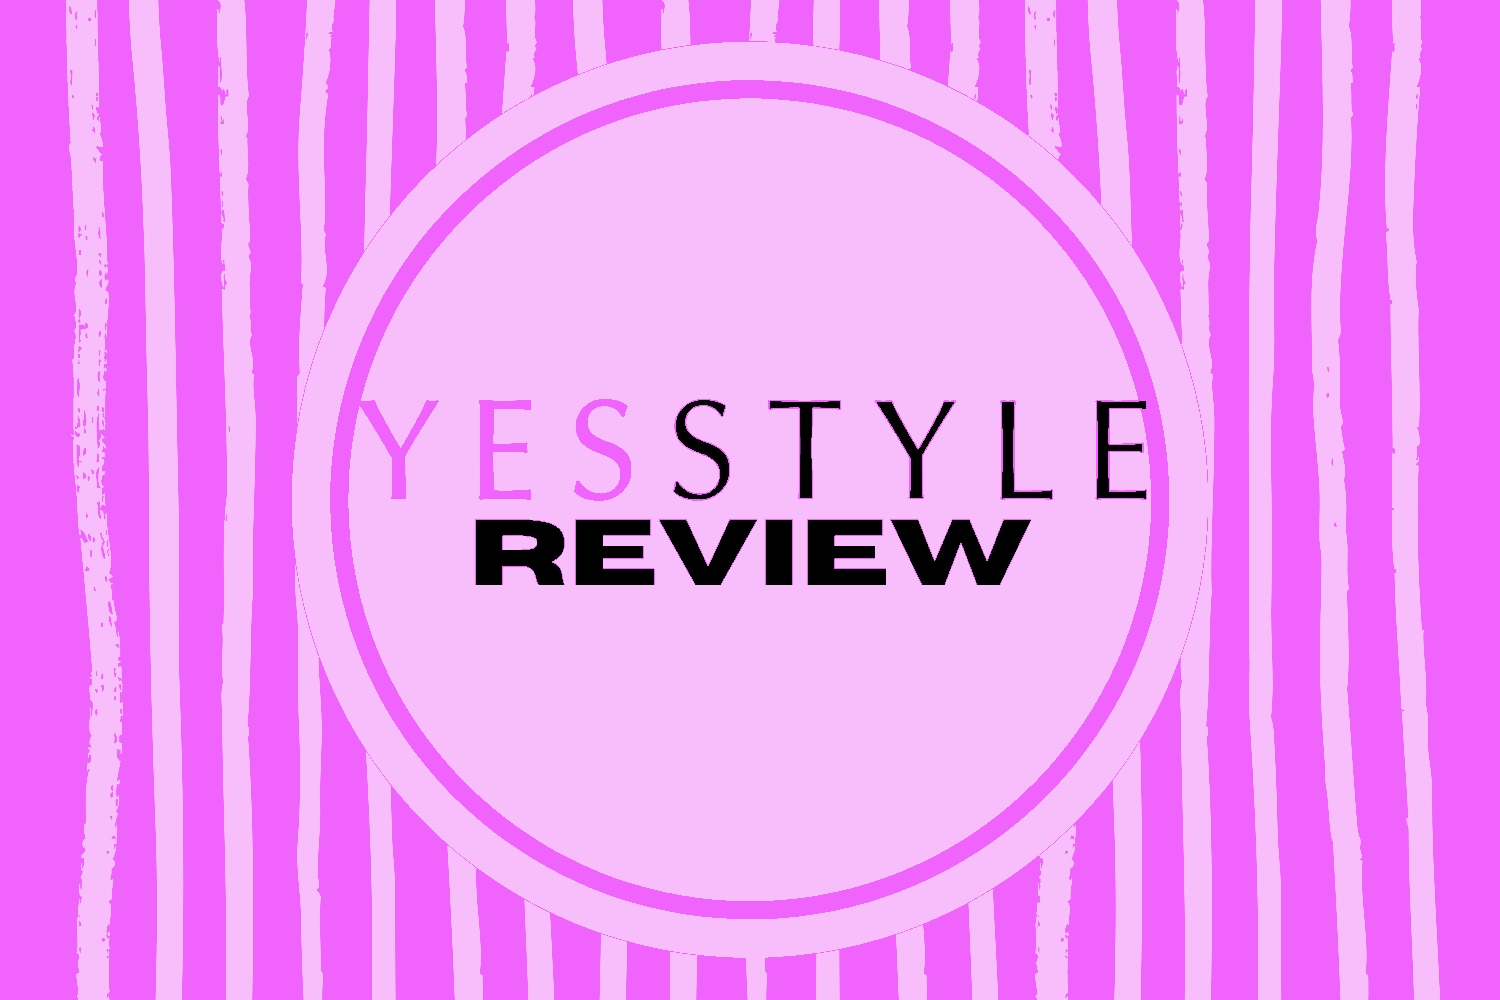 how to write review on yesstyle